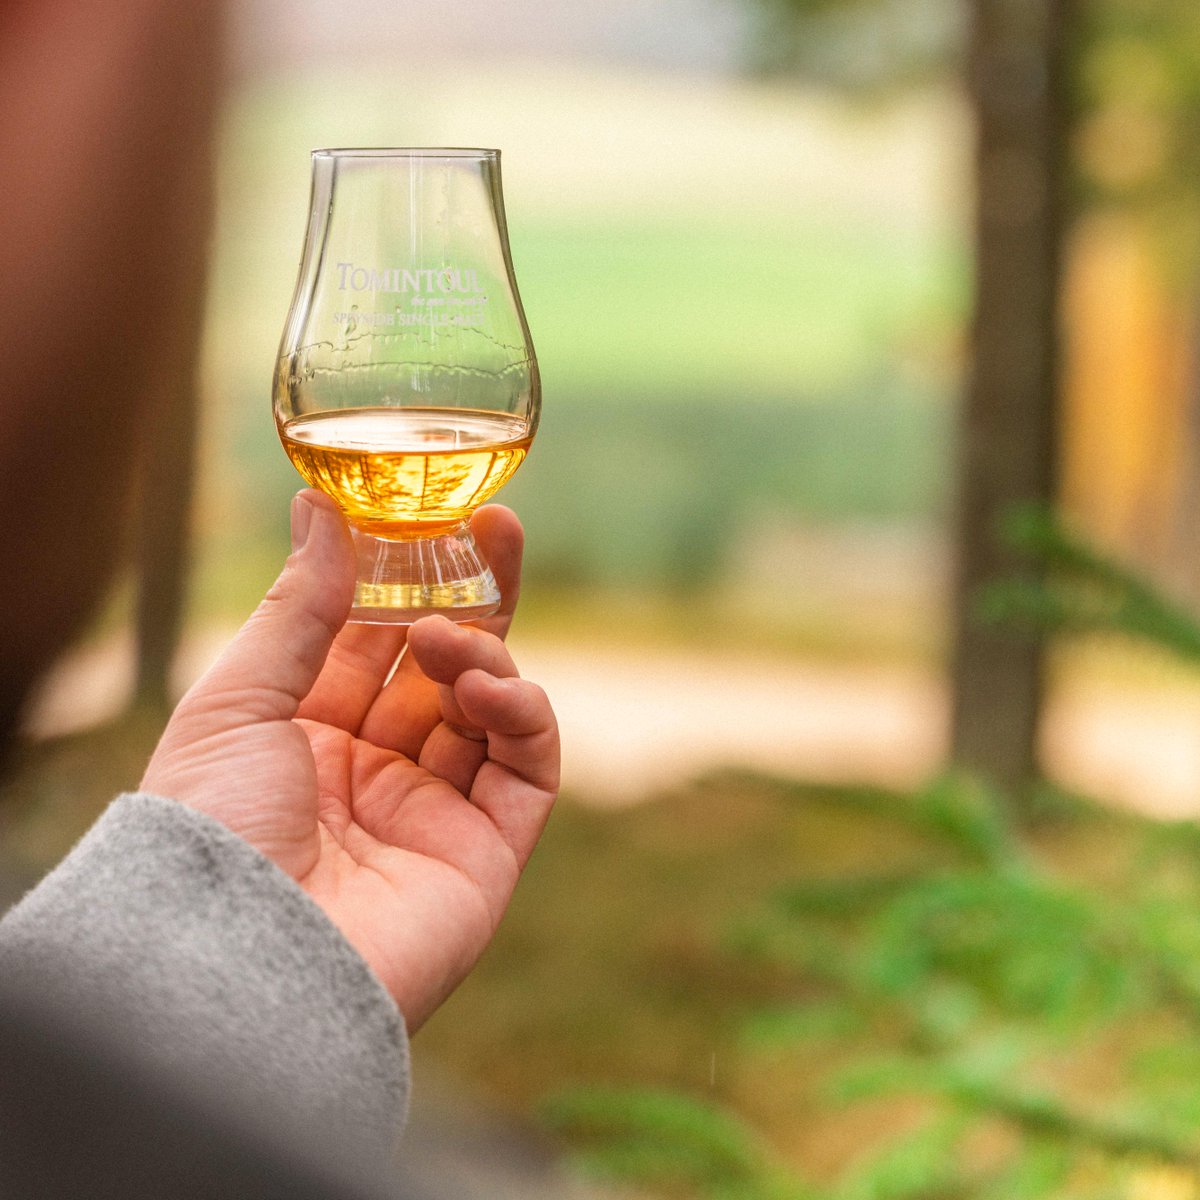 Share a photo of your favourite spot to enjoy a dram of Tomintoul Single Malt. Bonus points for scenic views!